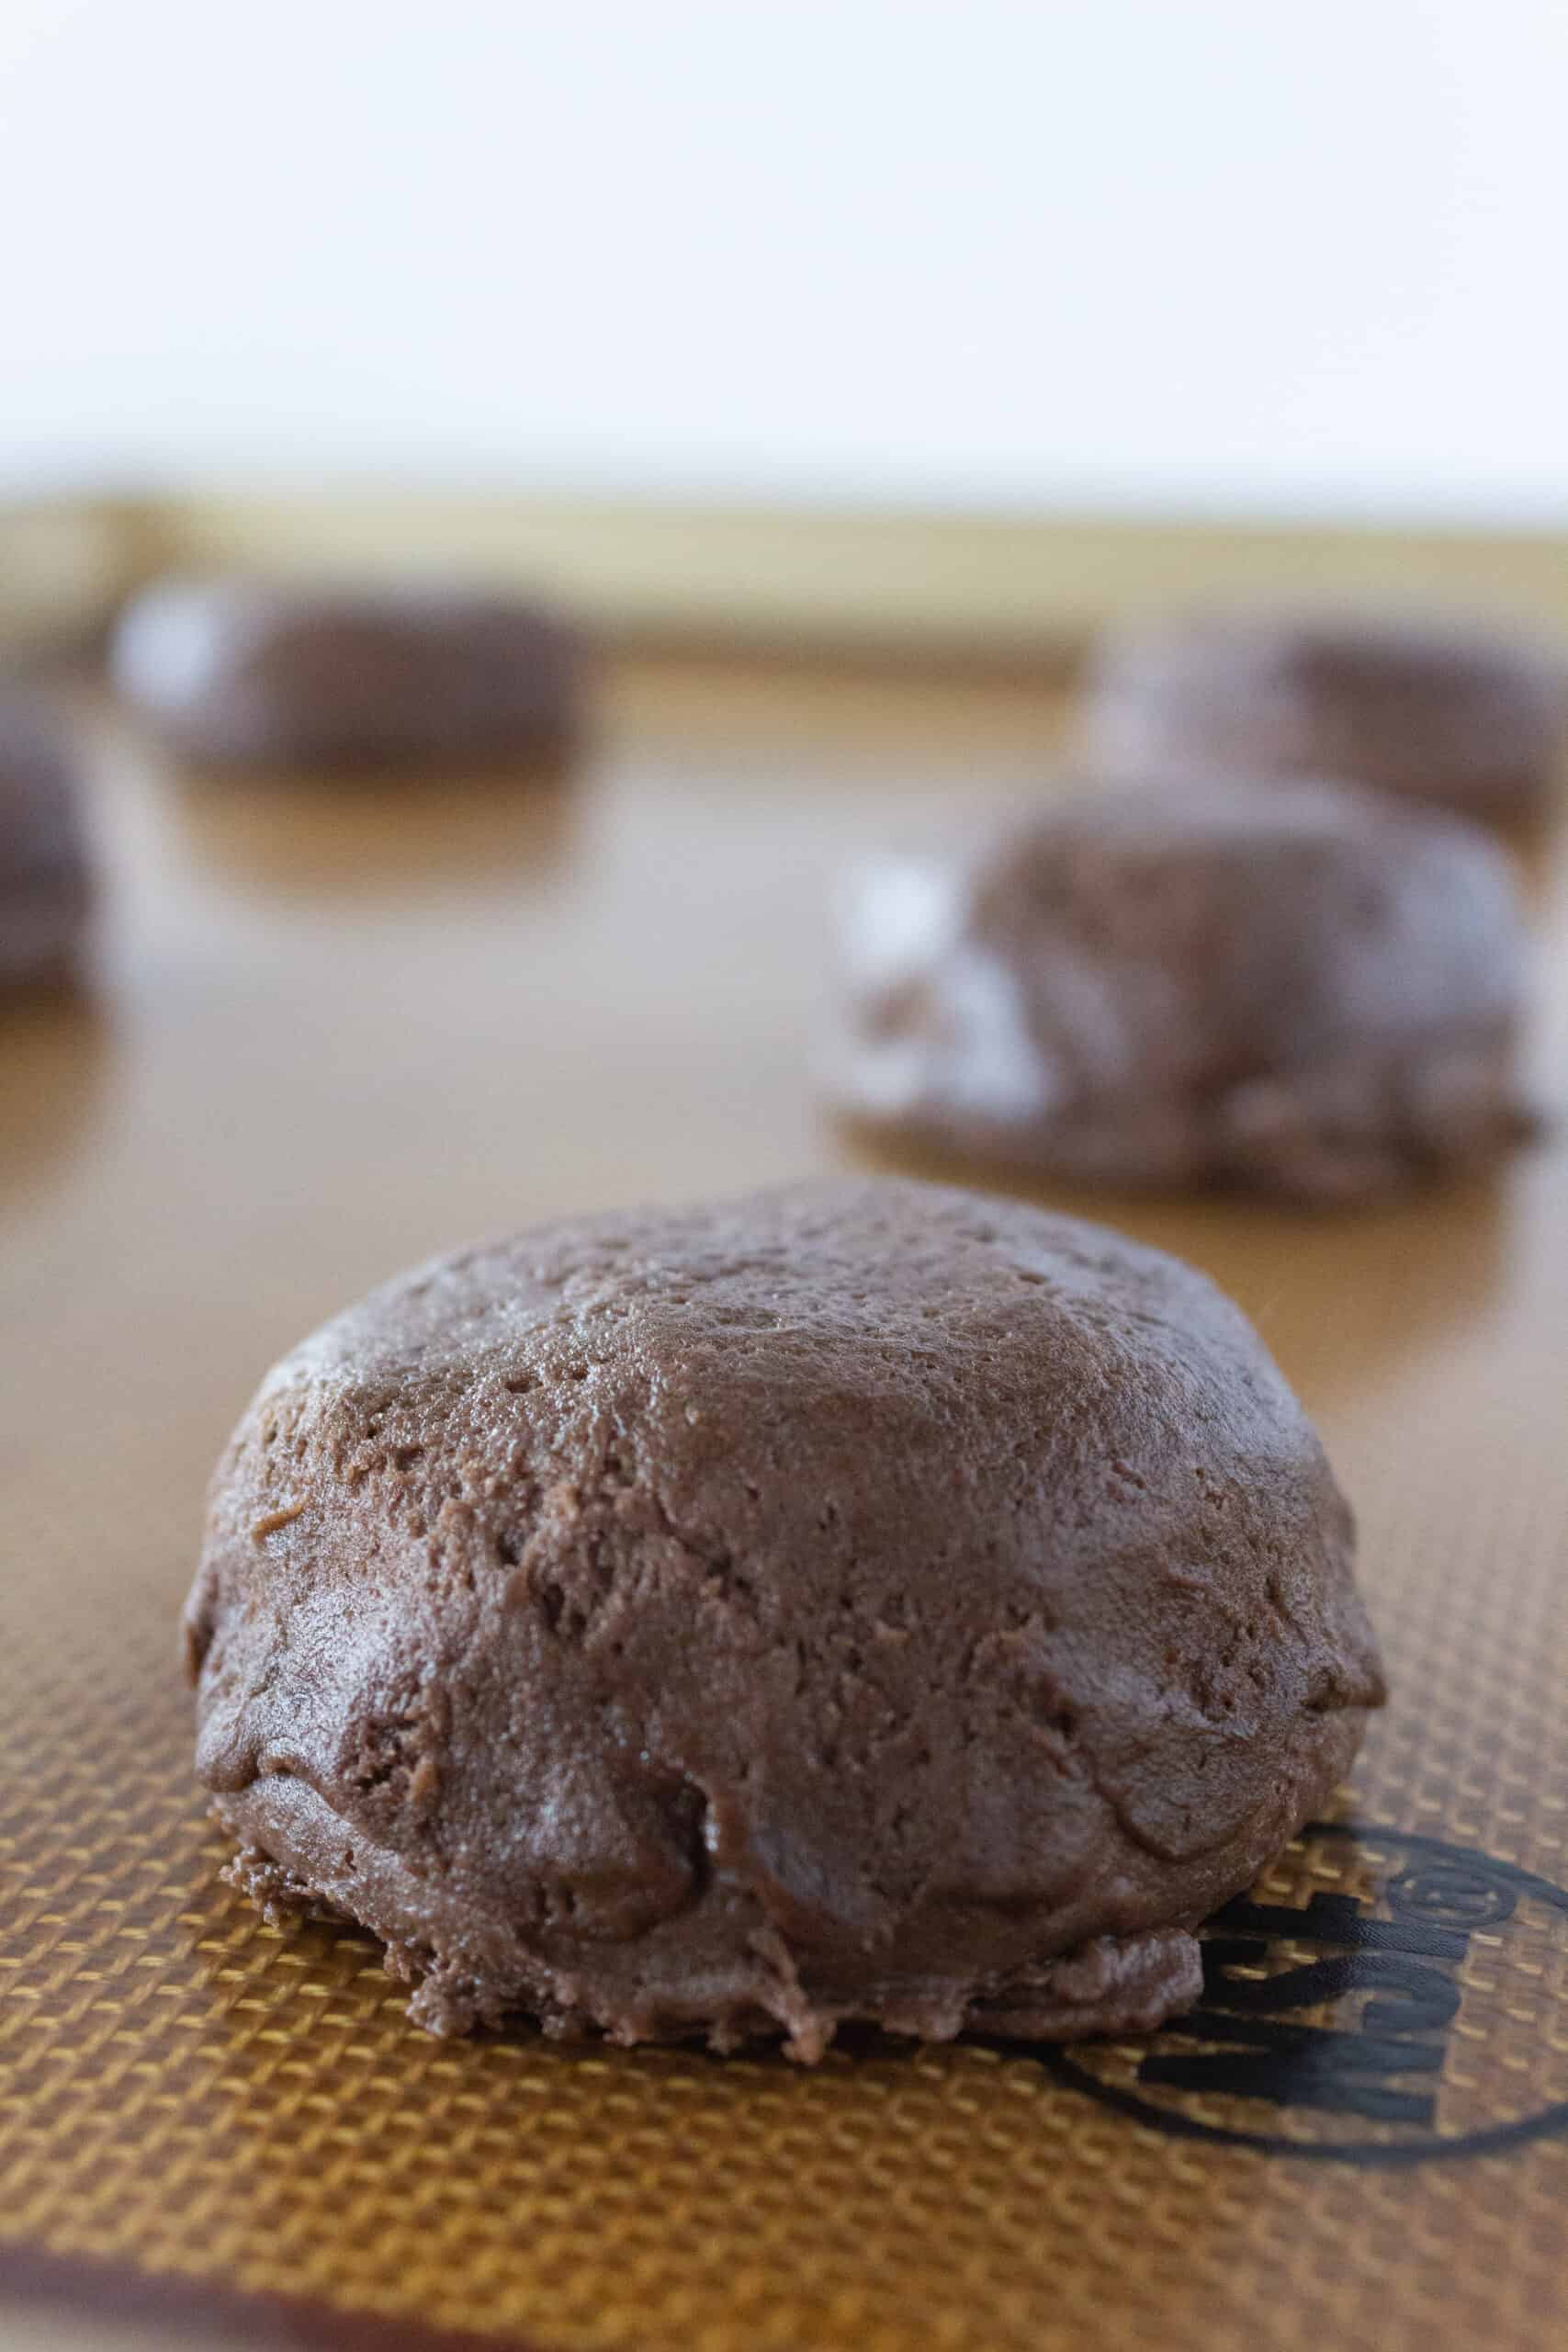 Chocolate Cheesecake Cookies made with a Cake Mix, a recipe featured by top US cookies blogger, Practically Homemade